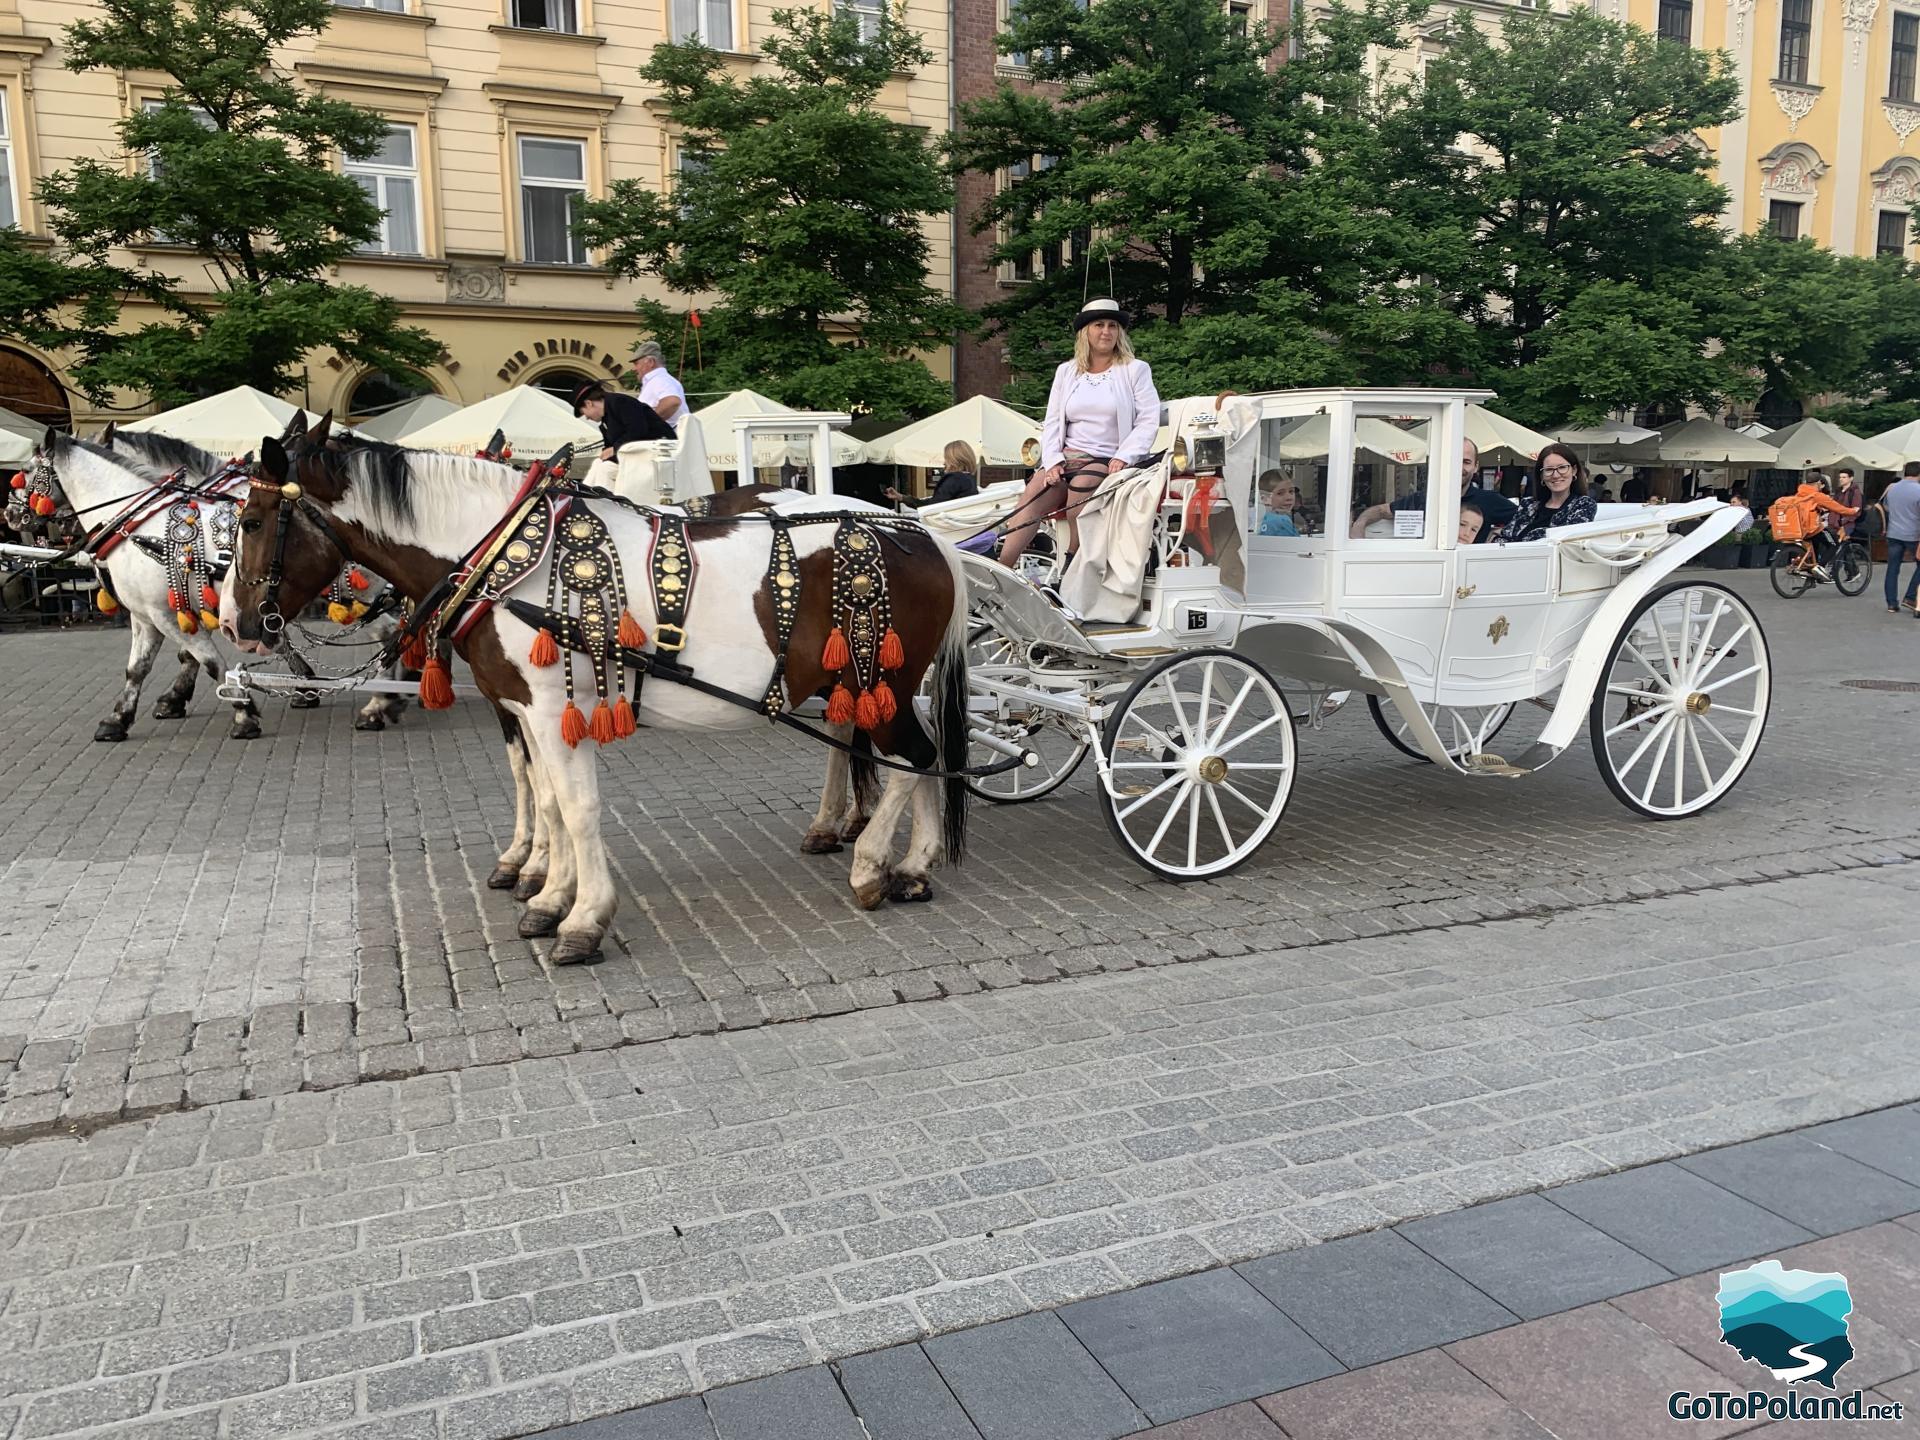 the family is in a white carriage, the woman is the coachman, the horses are white and brown